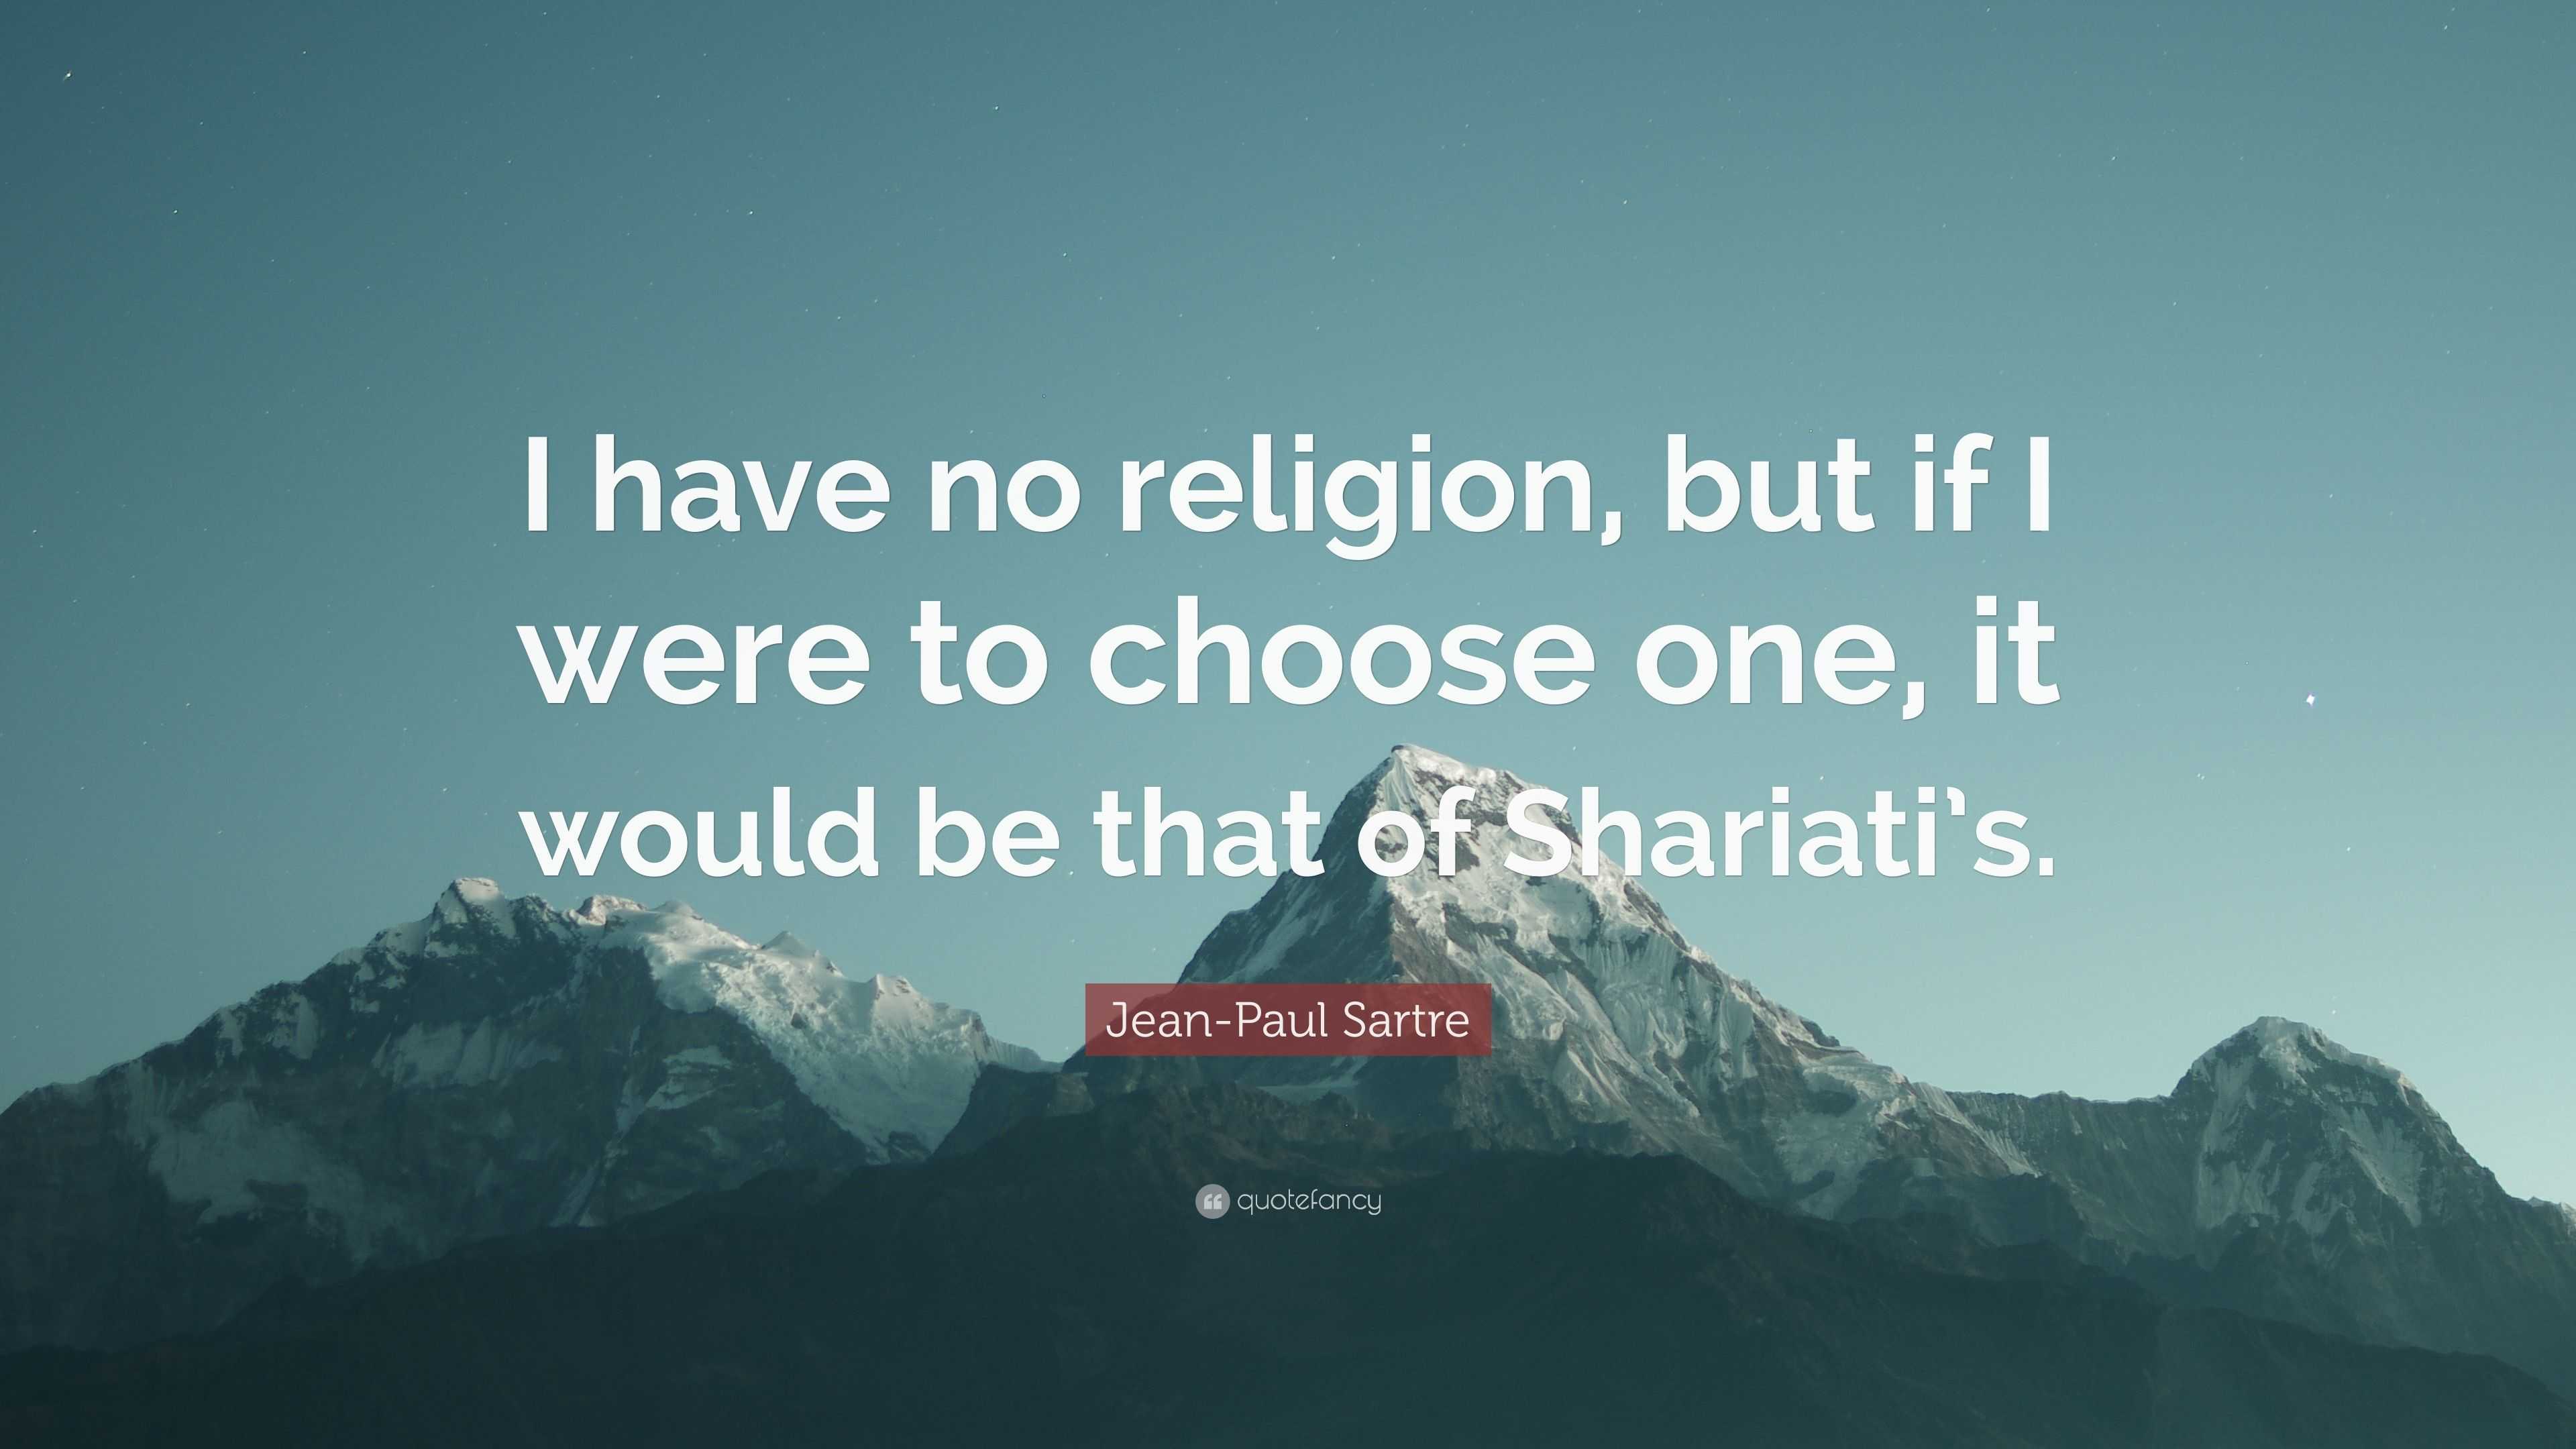 Jean-Paul Sartre Quote: “I have no religion, but if I were to choose ...